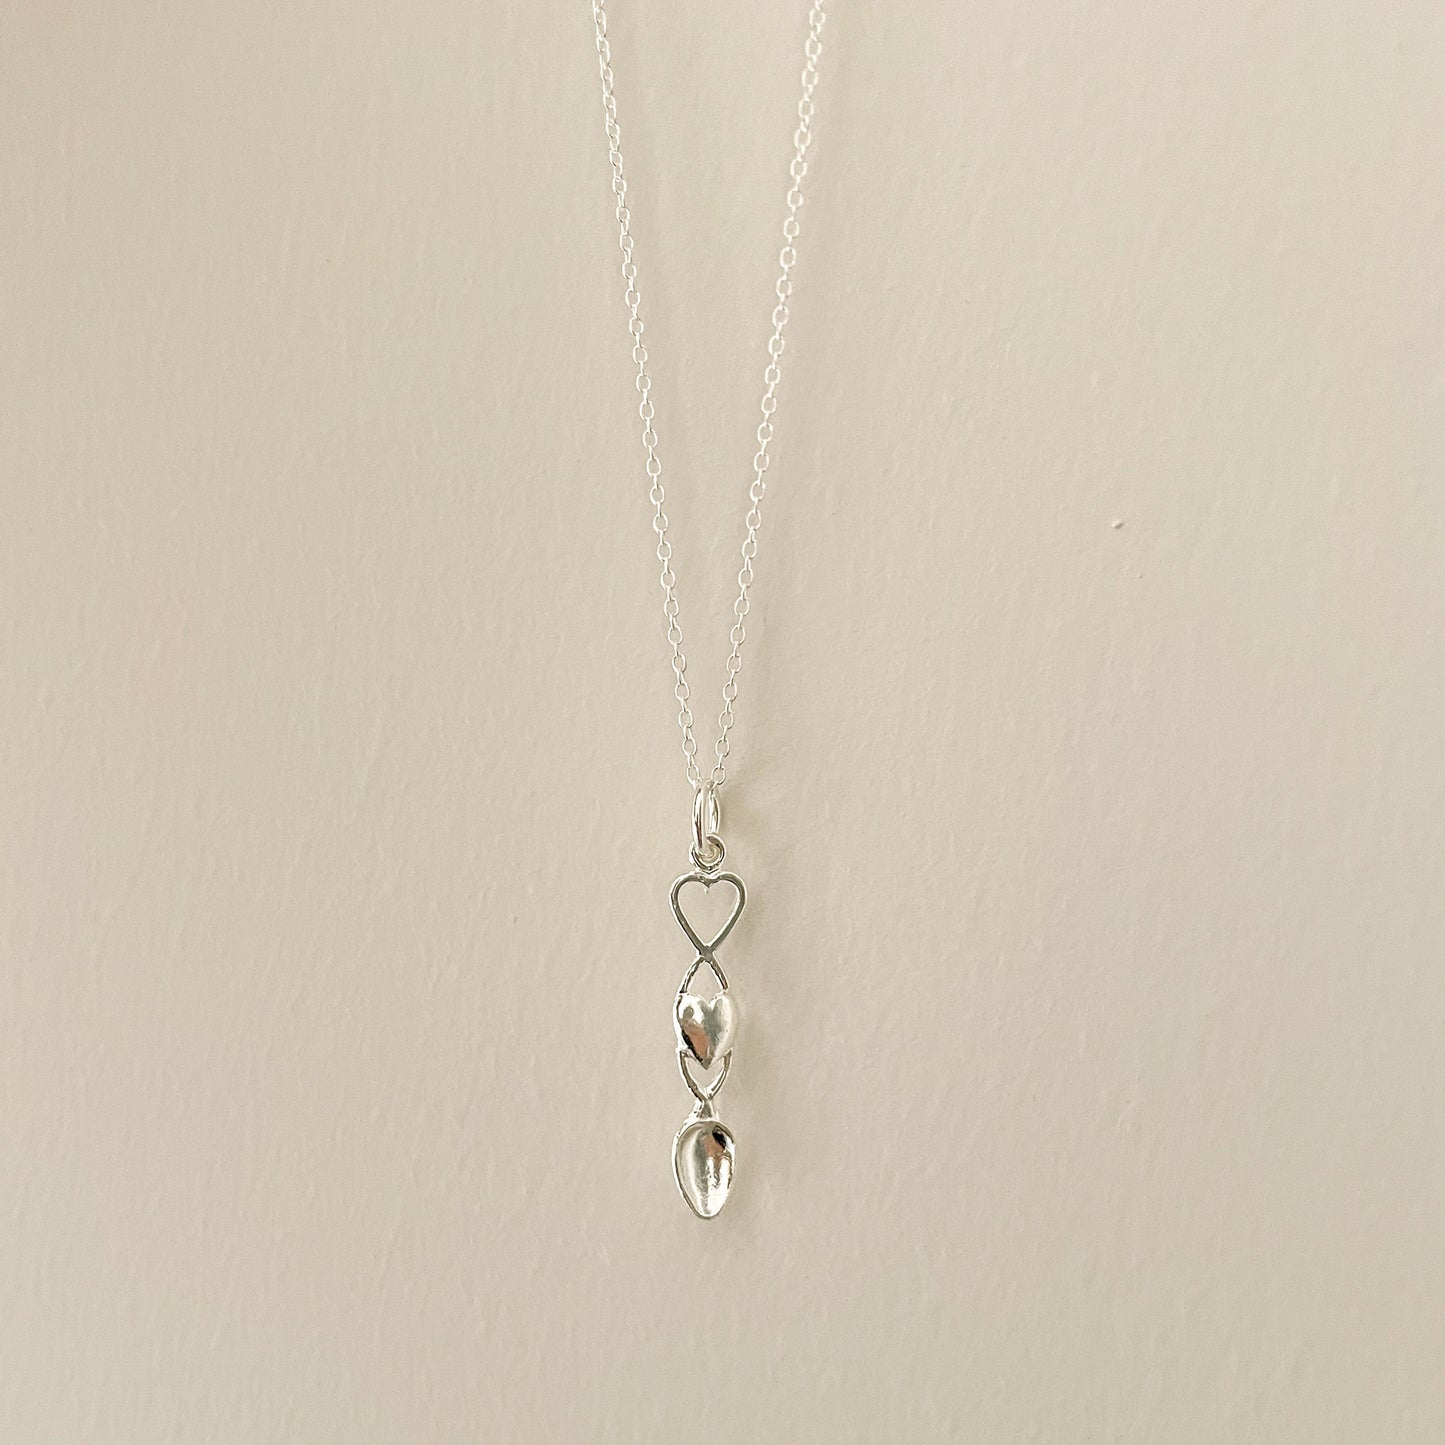 Necklace - Sterling Silver - Welsh Lovespoon - 16" Chain